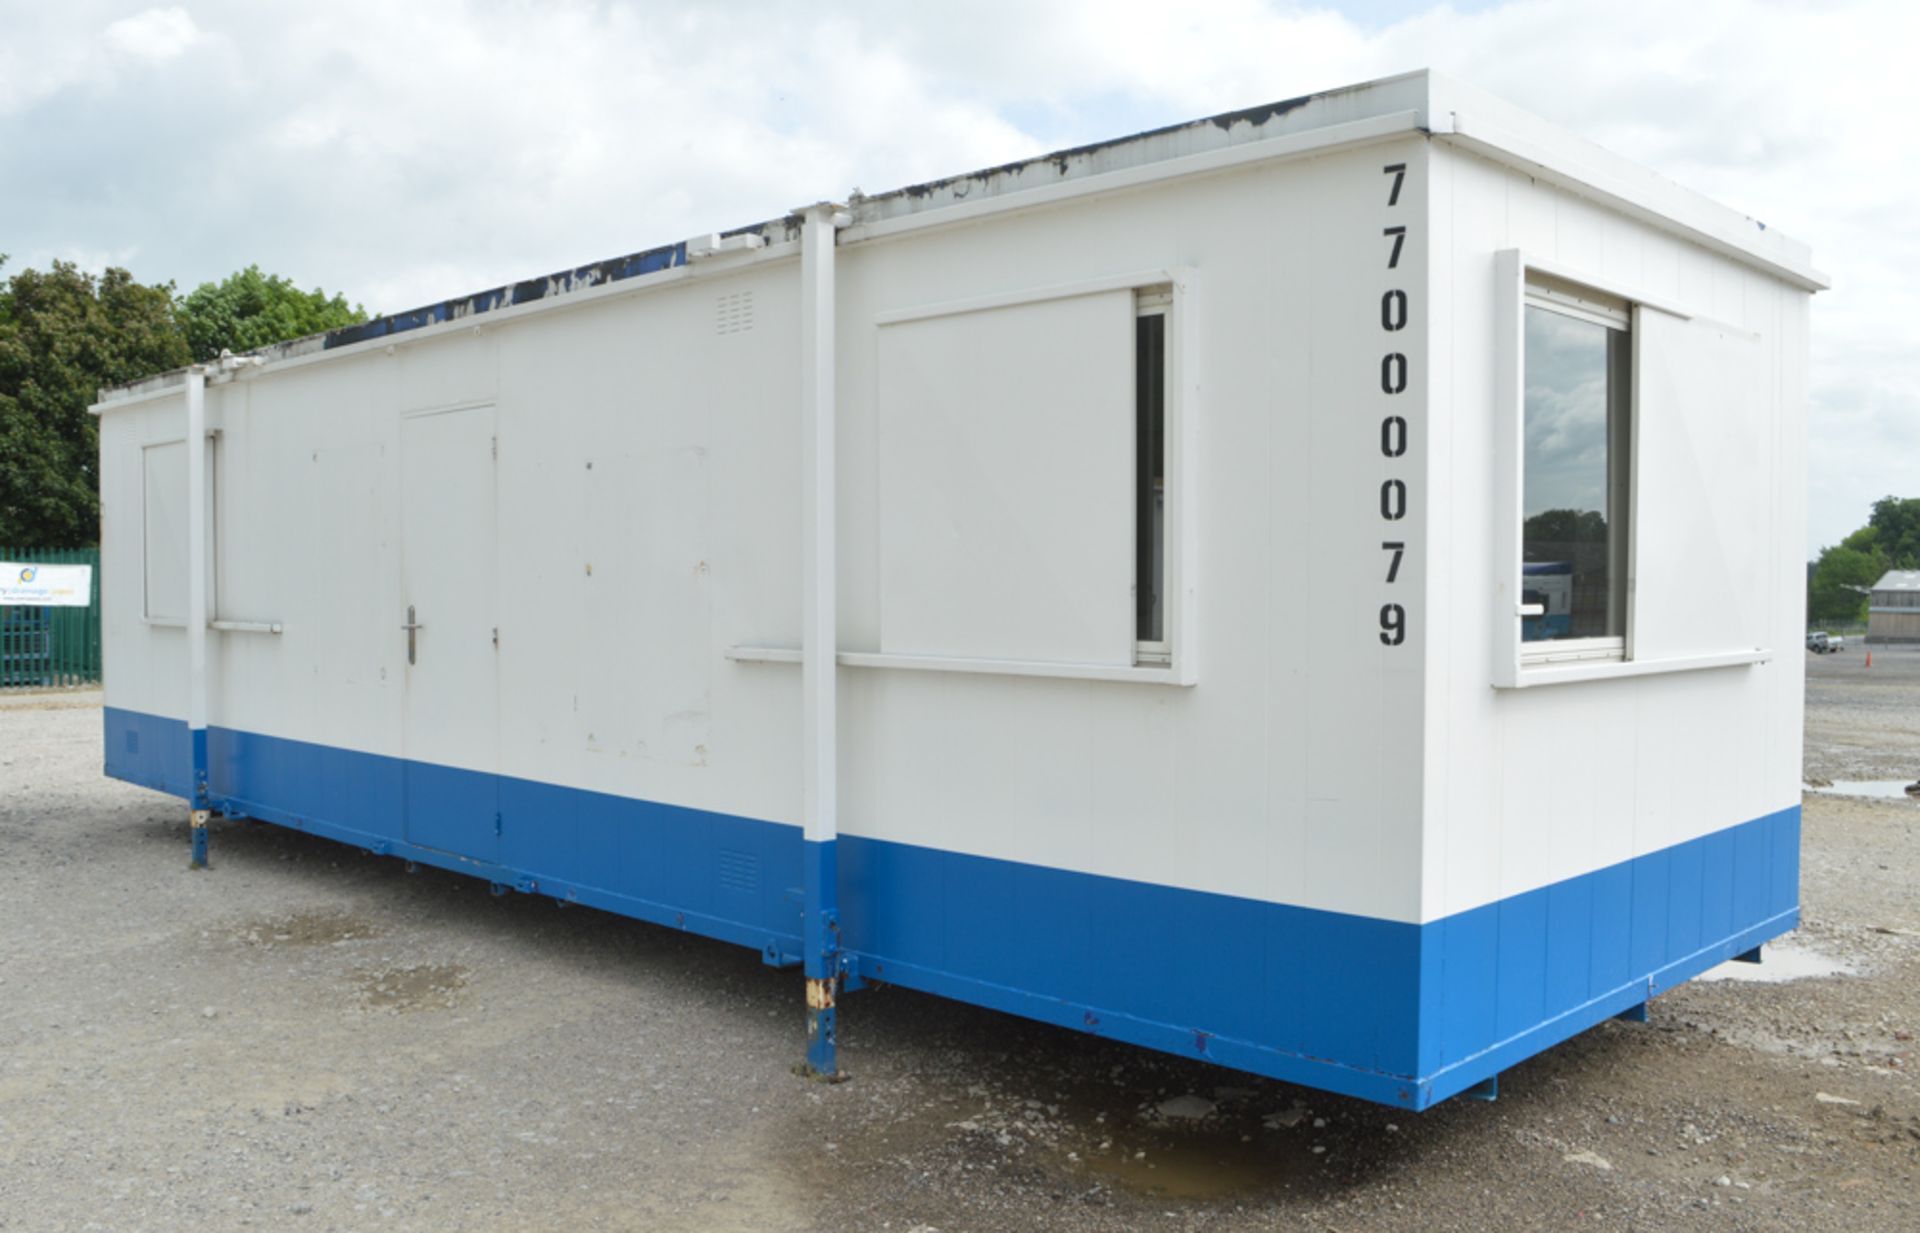 32 ft x 10 ft steel anti vandal jack leg site office unit comprising of: 2 offices & lobby c/w - Image 4 of 7